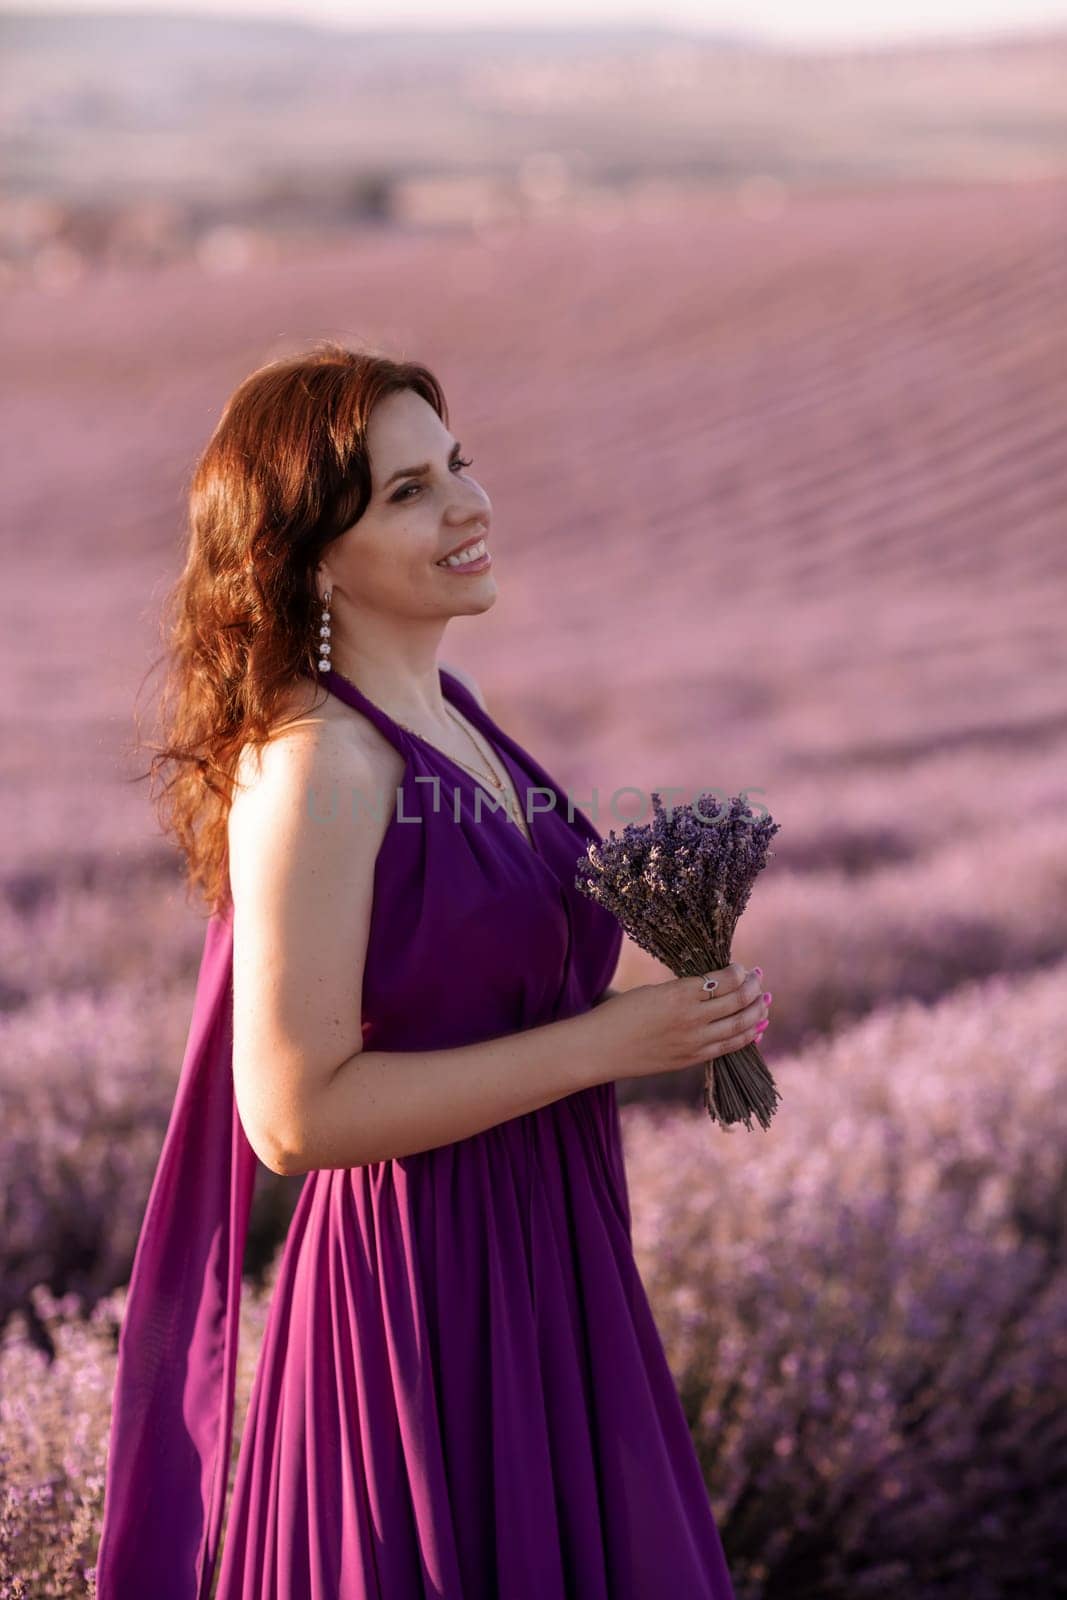 A woman in a purple dress is standing in a field of lavender flowers. She is holding a bouquet of flowers in her hand